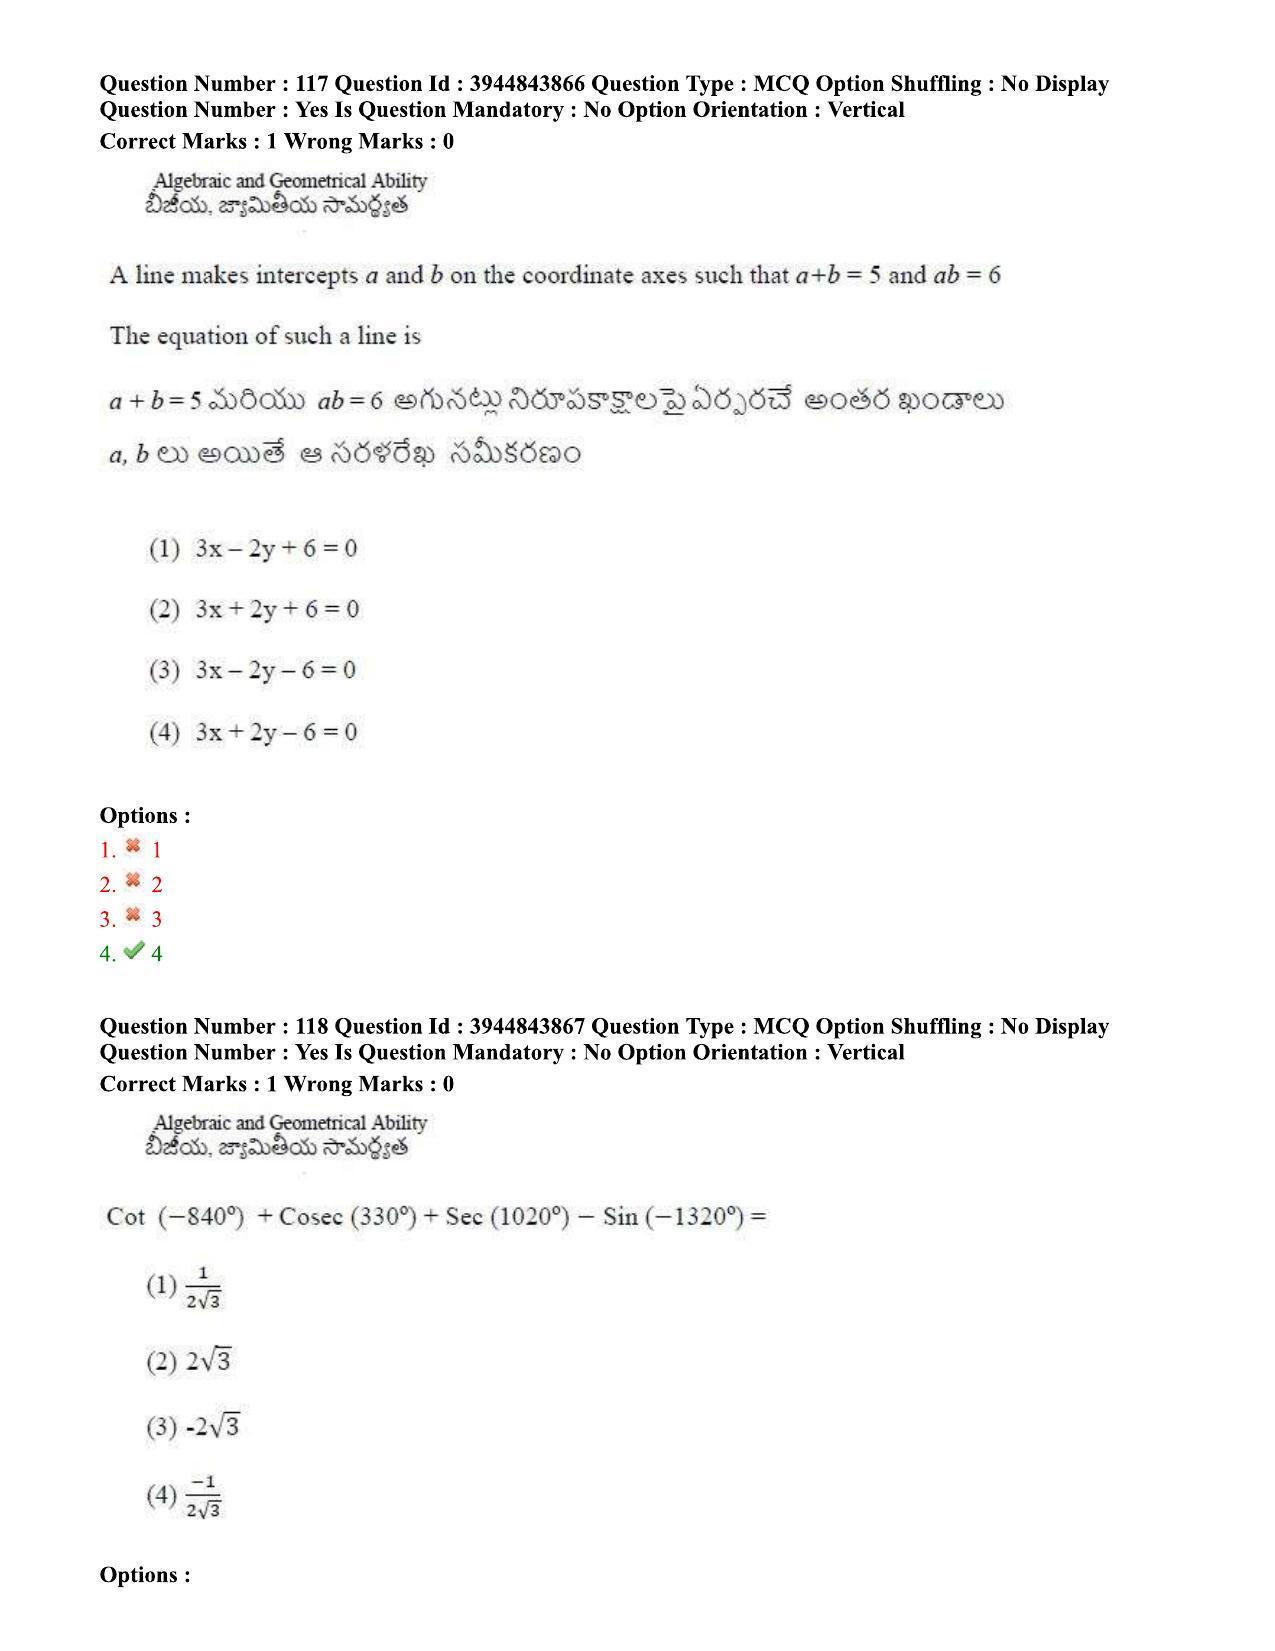 TS ICET 2020 Question Paper 1 - Oct 1, 2020	 - Page 91